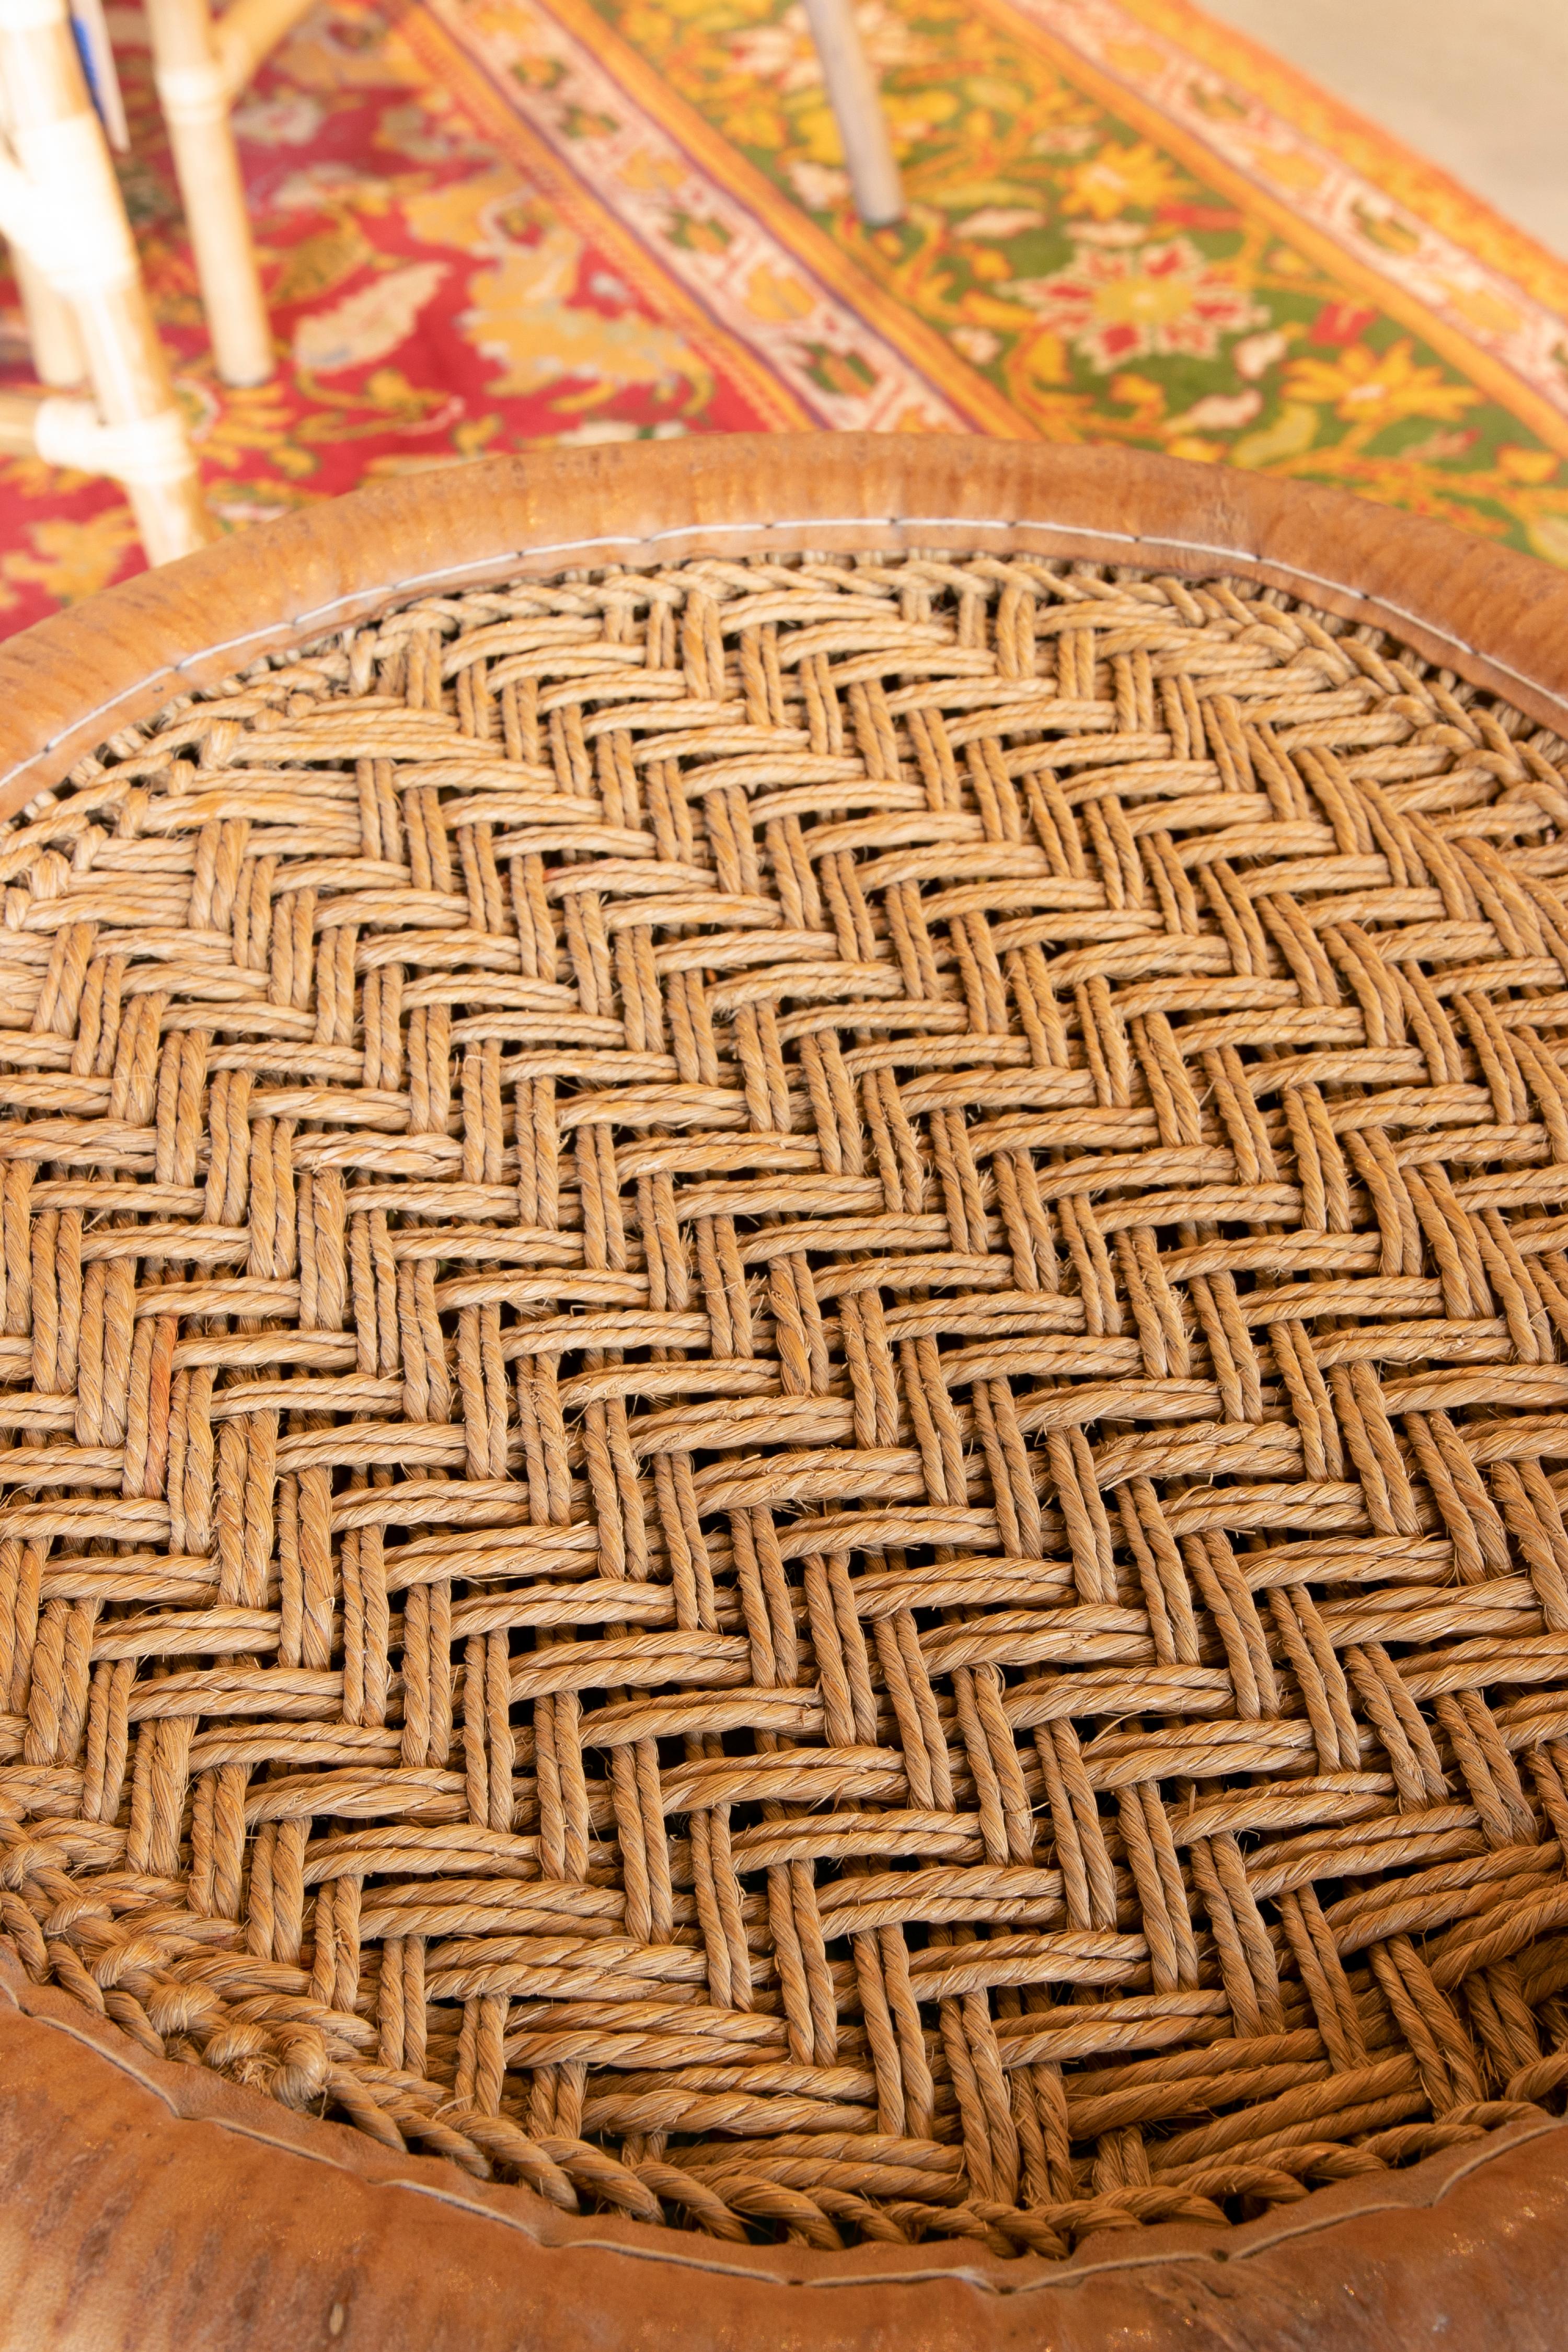 Wicker and Leather Stool  Handmade with Round Shape 1